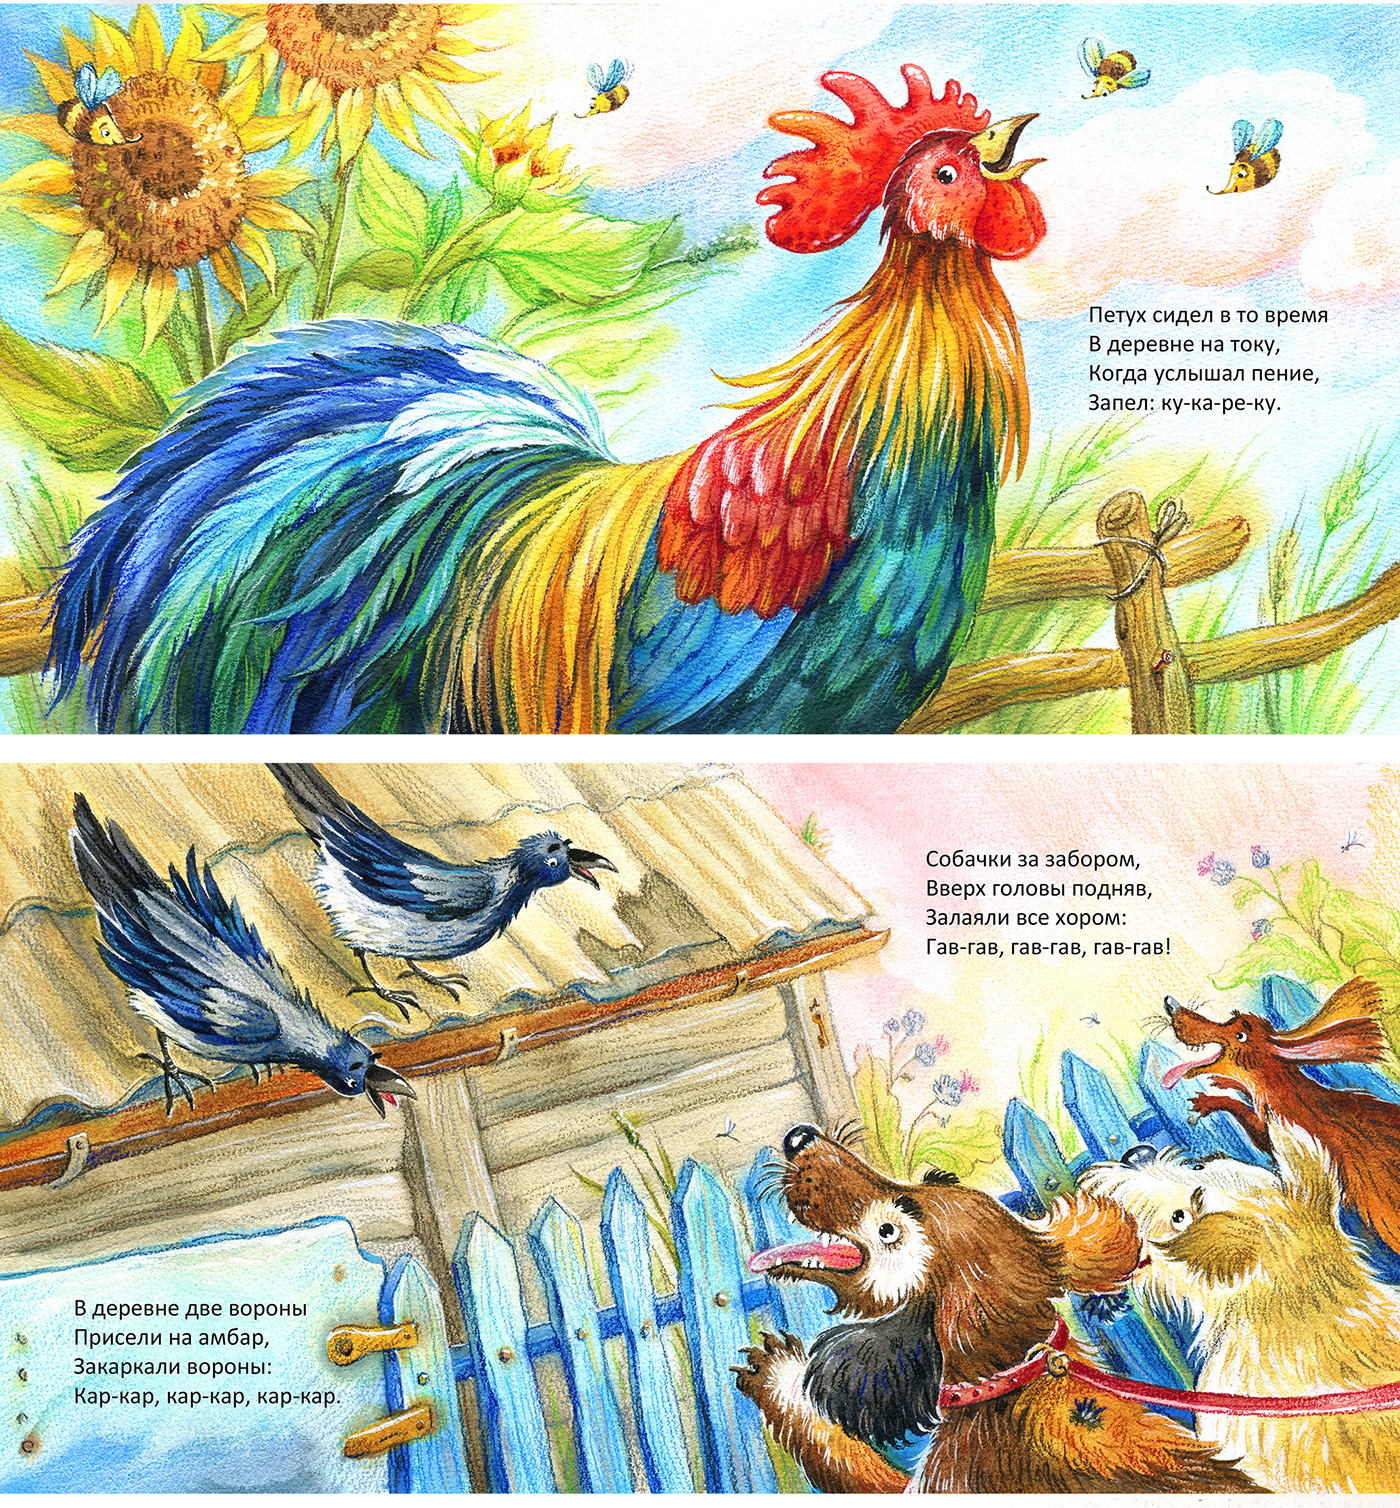 Illustrations for
the children's book "Animal sounds"